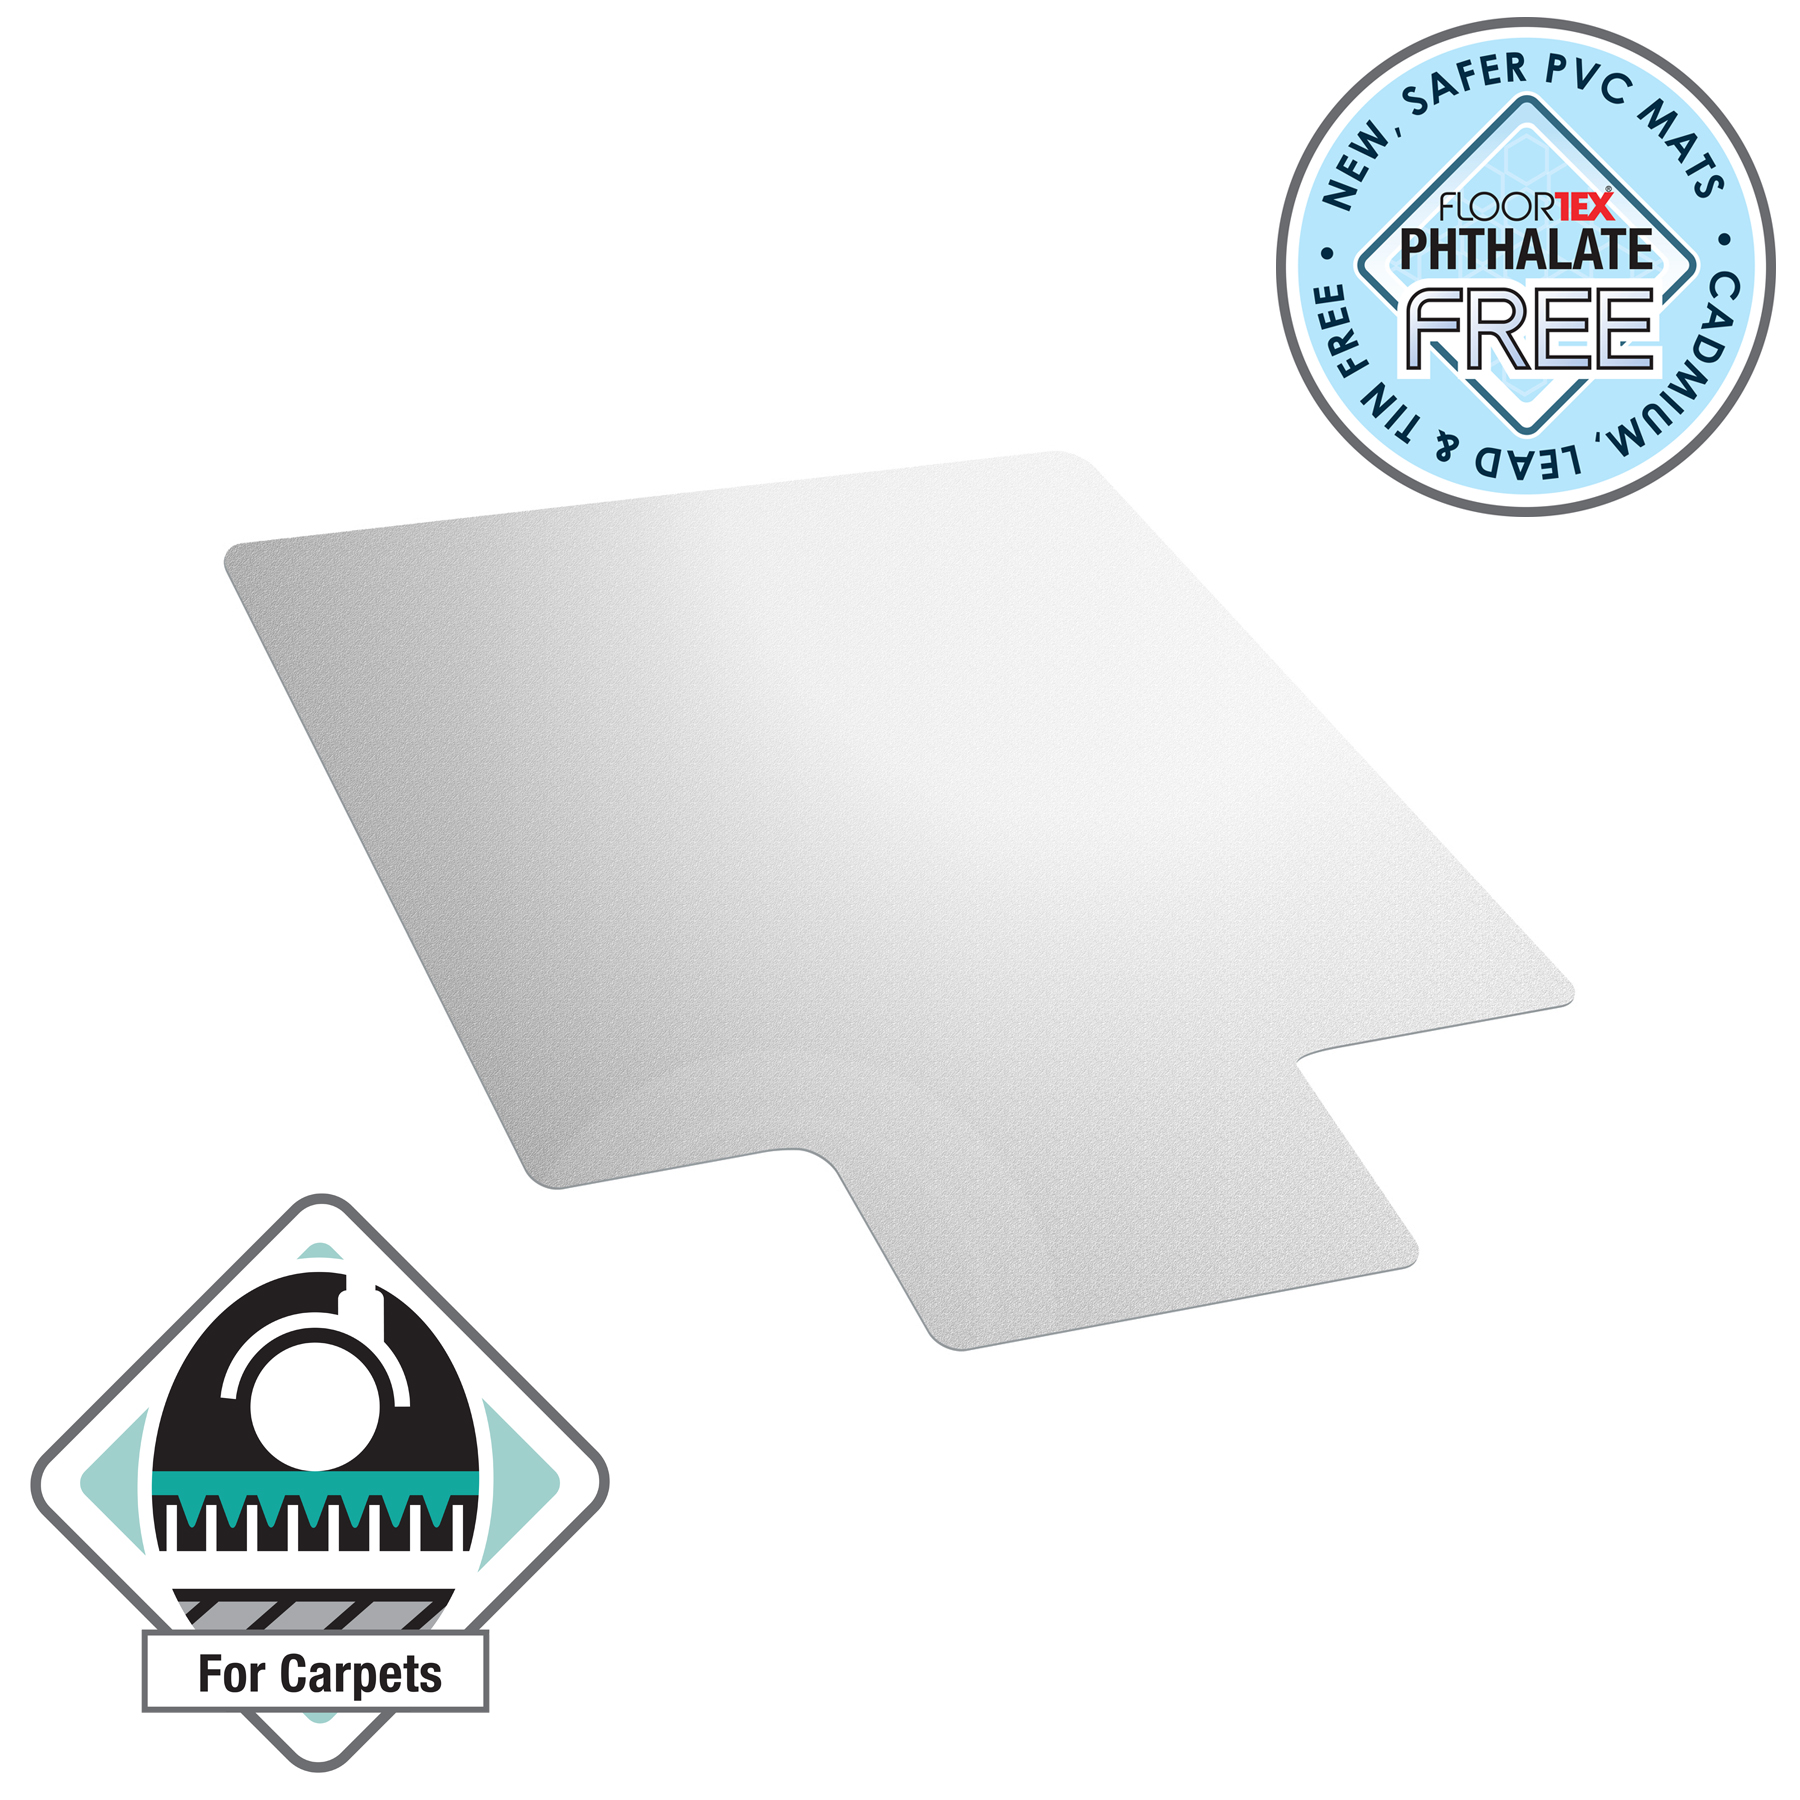 Advantagemat® Vinyl Lipped Chair Mat for Carpets up to 3/8" - 36" x 48" - image 3 of 12